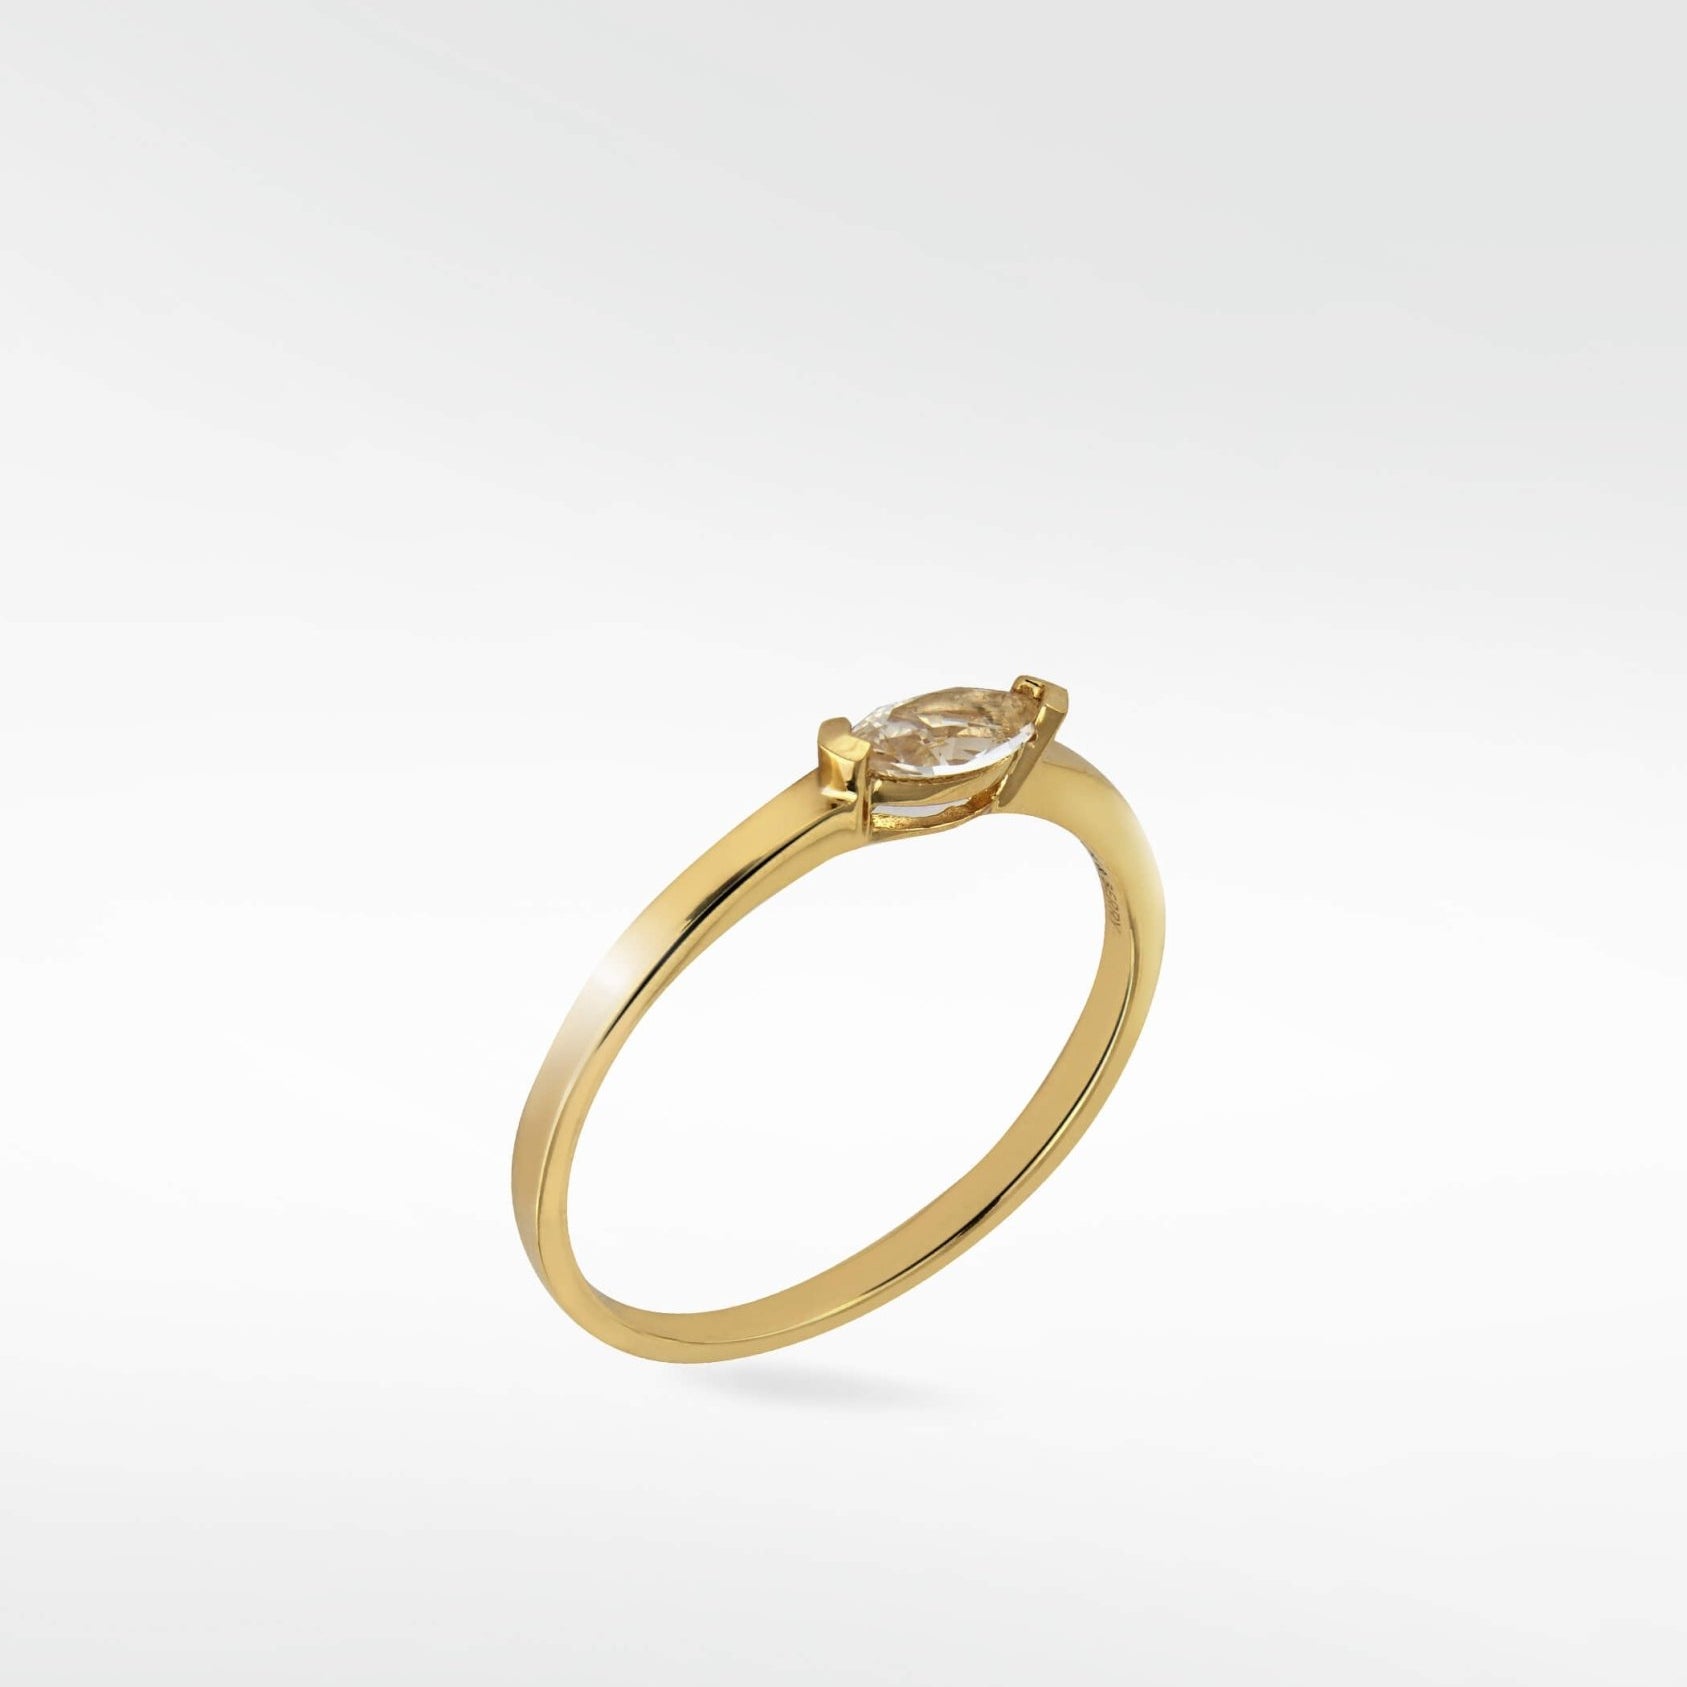 Veto Sapphire Solitaire Ring in 14K Gold - Lark and Berry